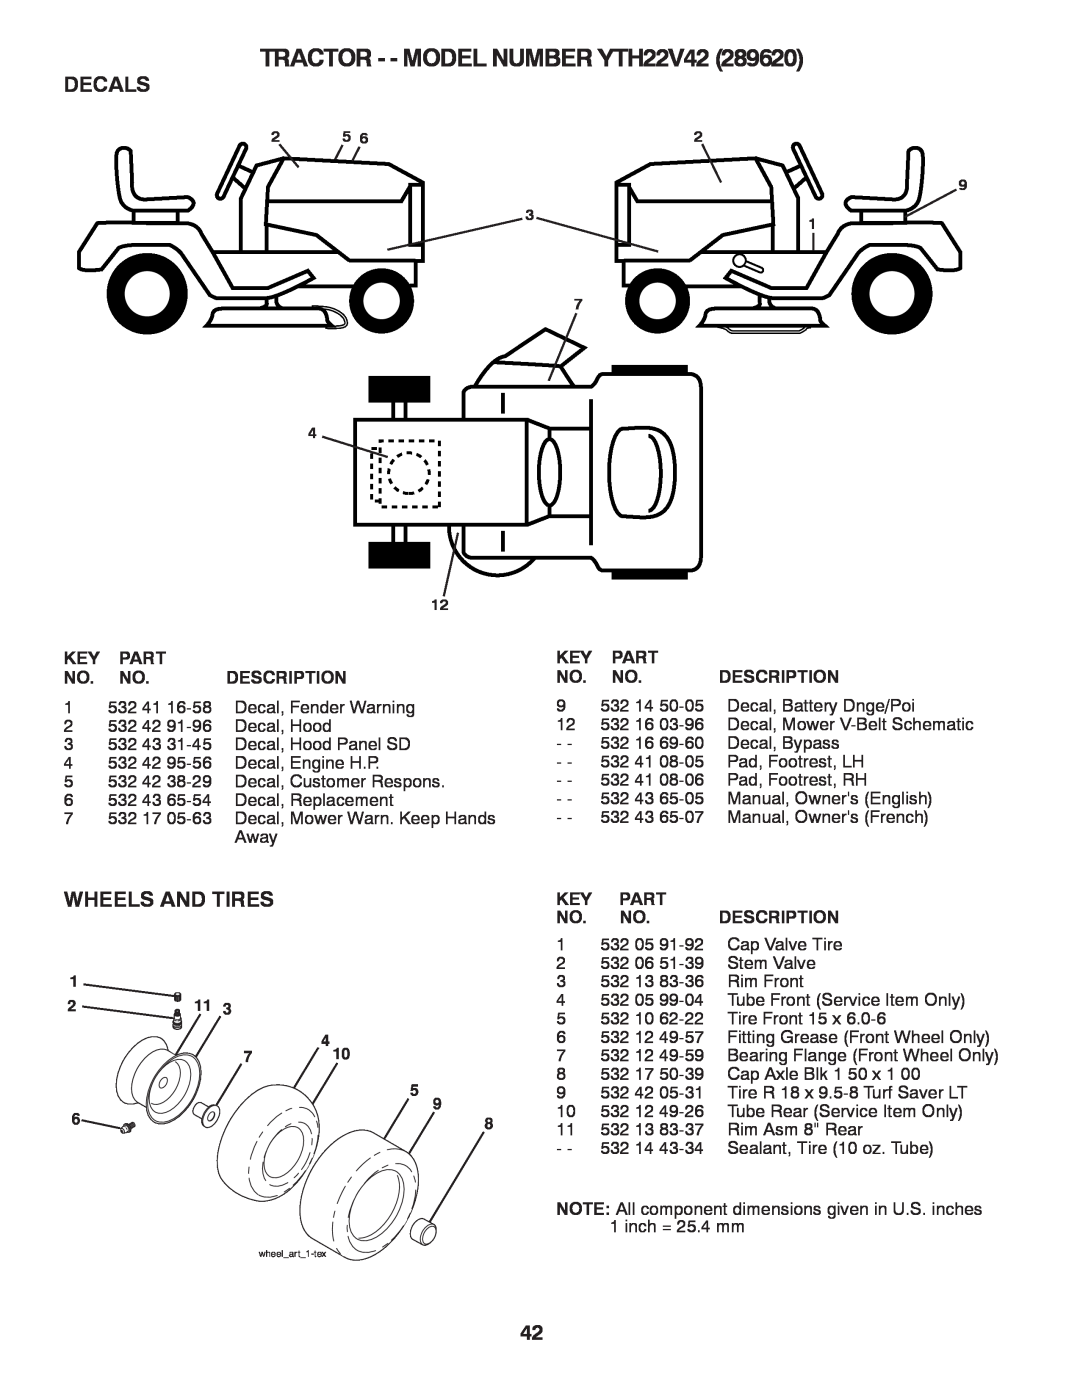 Husqvarna owner manual Decals, Wheels And Tires, TRACTOR - - MODEL NUMBER YTH22V42, wheelart1-tex 